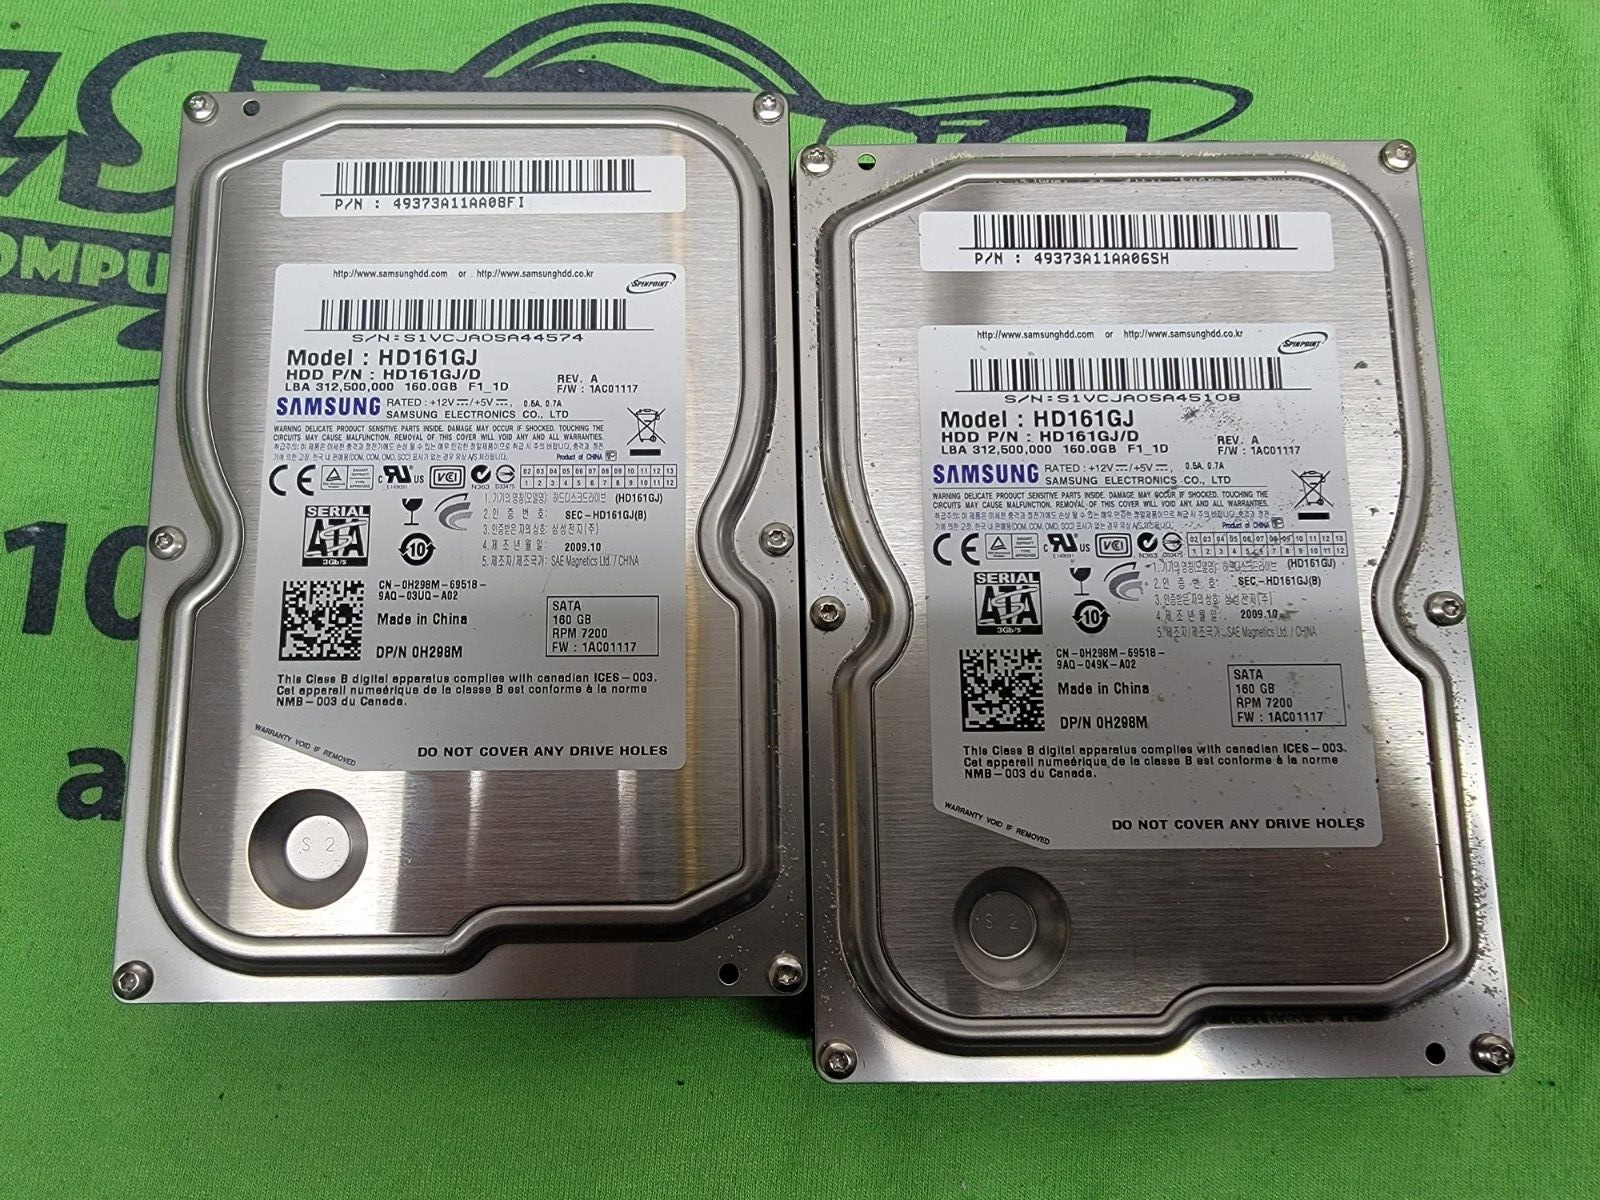 LOT OF 2 Samsung SpinPoint F1 160 GB,Internal,7200 RPM,3.5